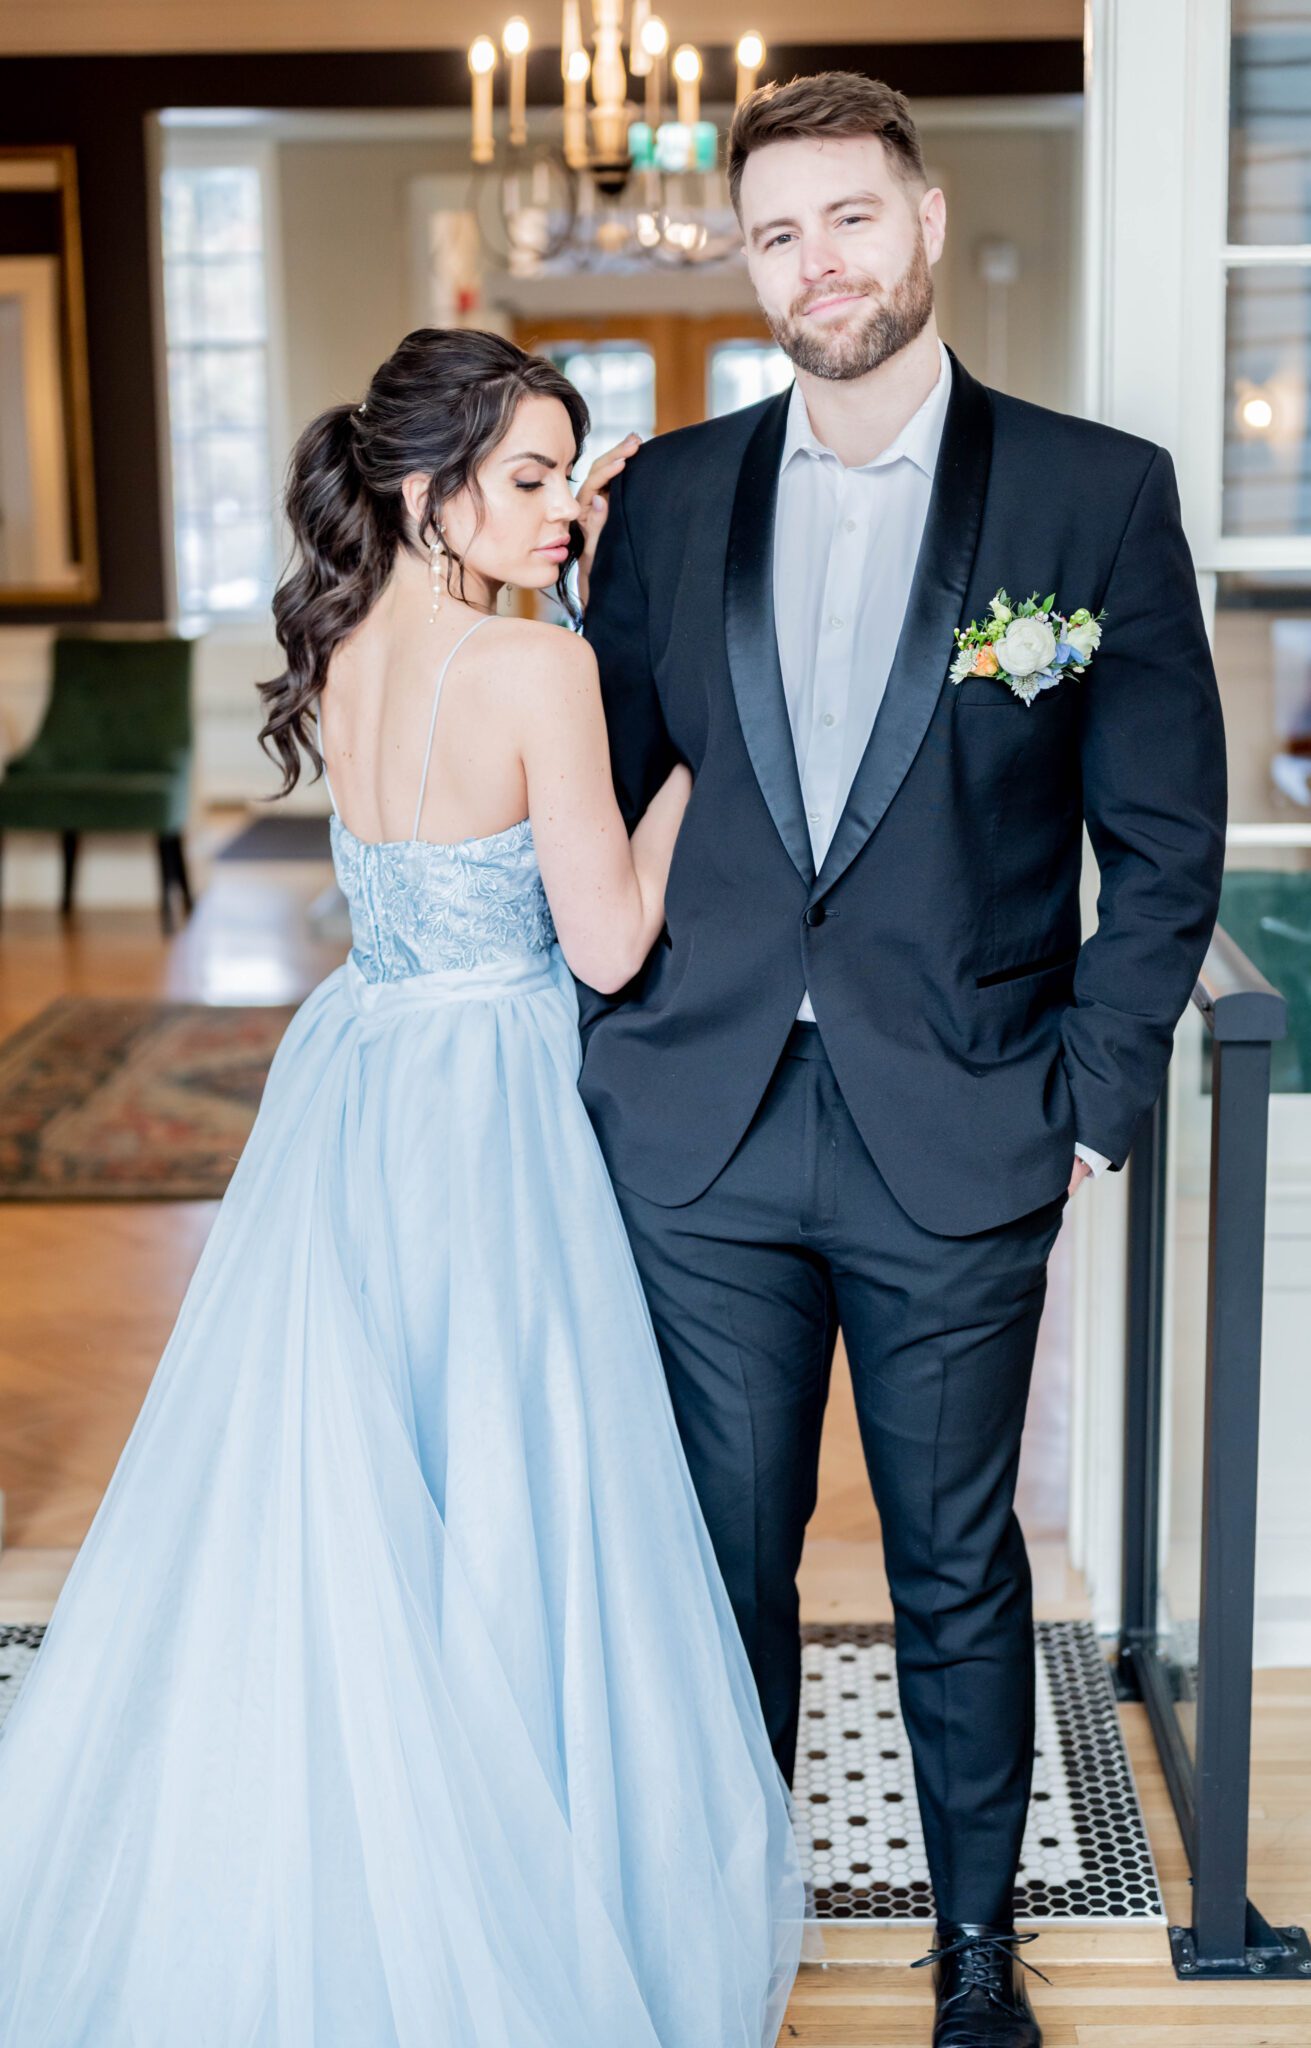 Bride and groom portrait in a mesmerizing baby blue wedding dress and timeless black suit by Derks Formal